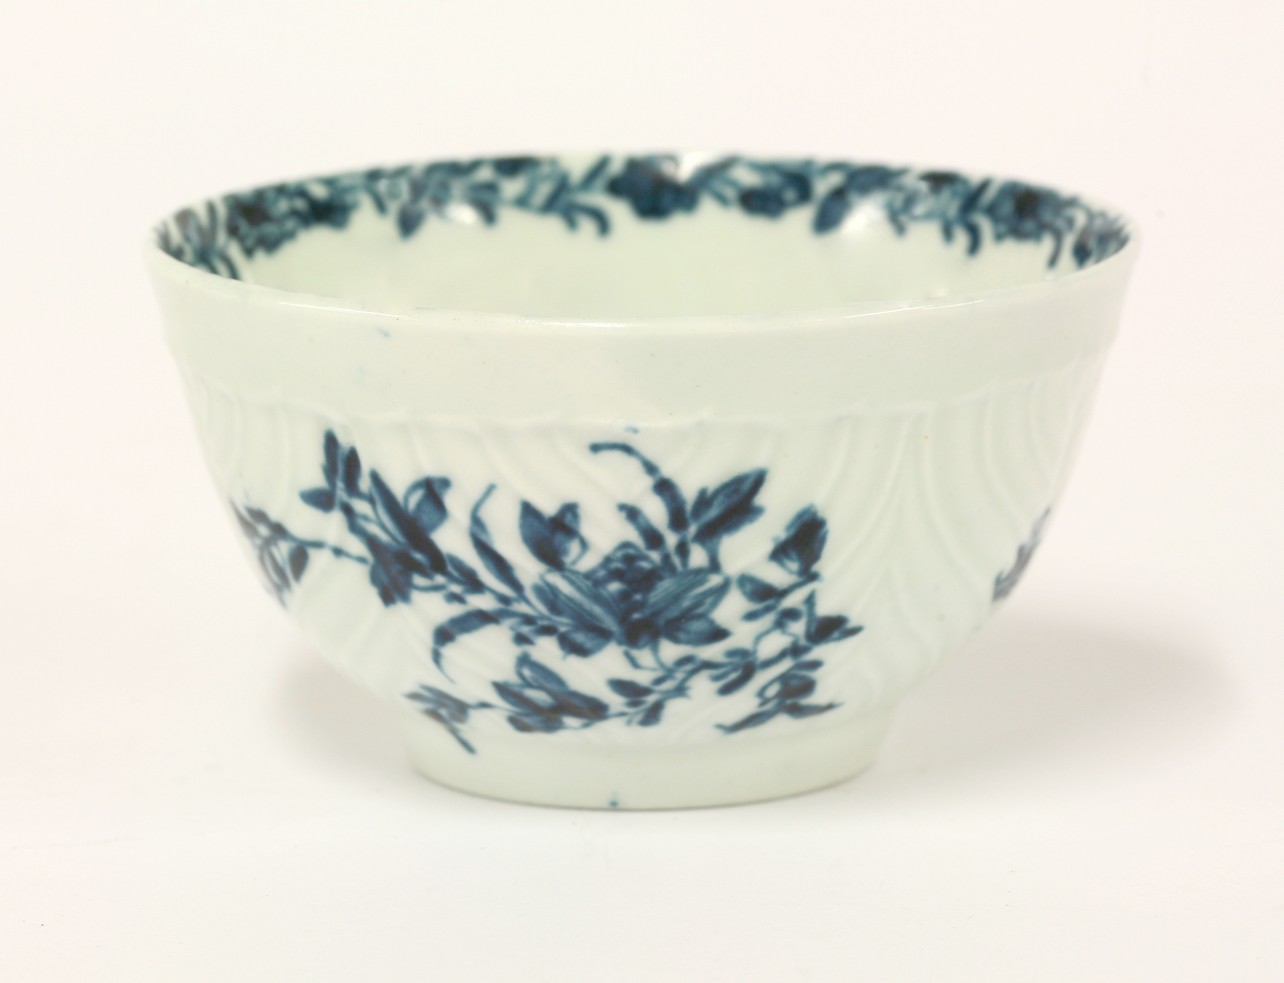 A Worcester Tea Bowl,
c.1765, feather moulded and painted in underglaze blue in the Prunus Root